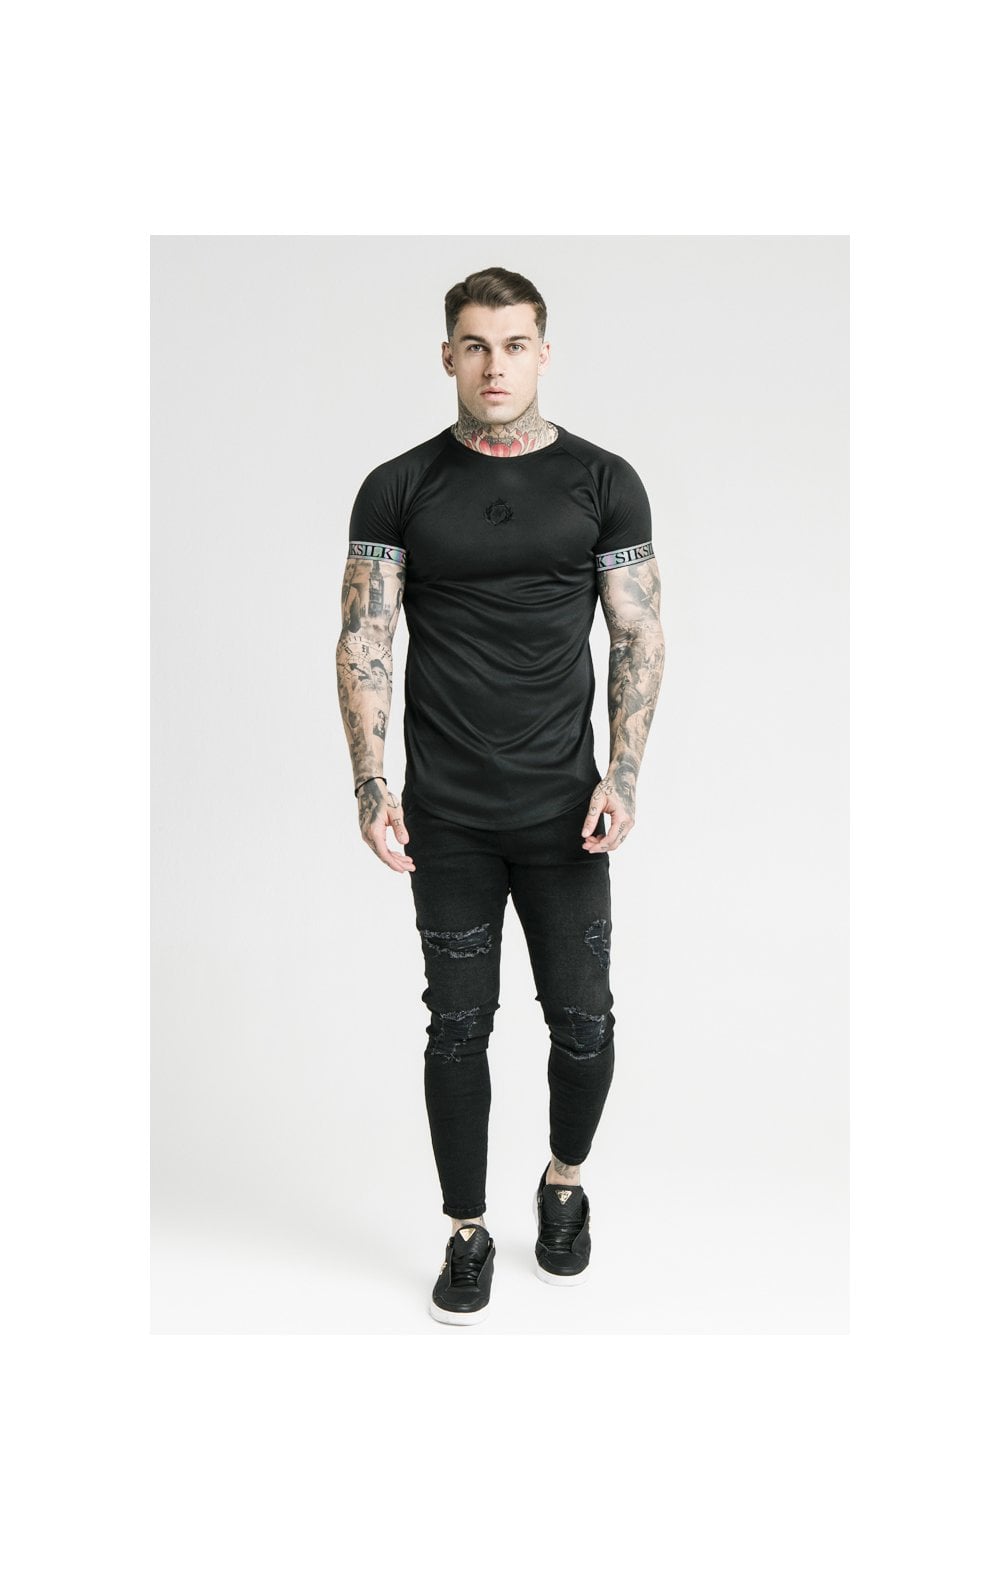 Load image into Gallery viewer, SikSilk S/S Iridescent Tech Tee - Black (3)